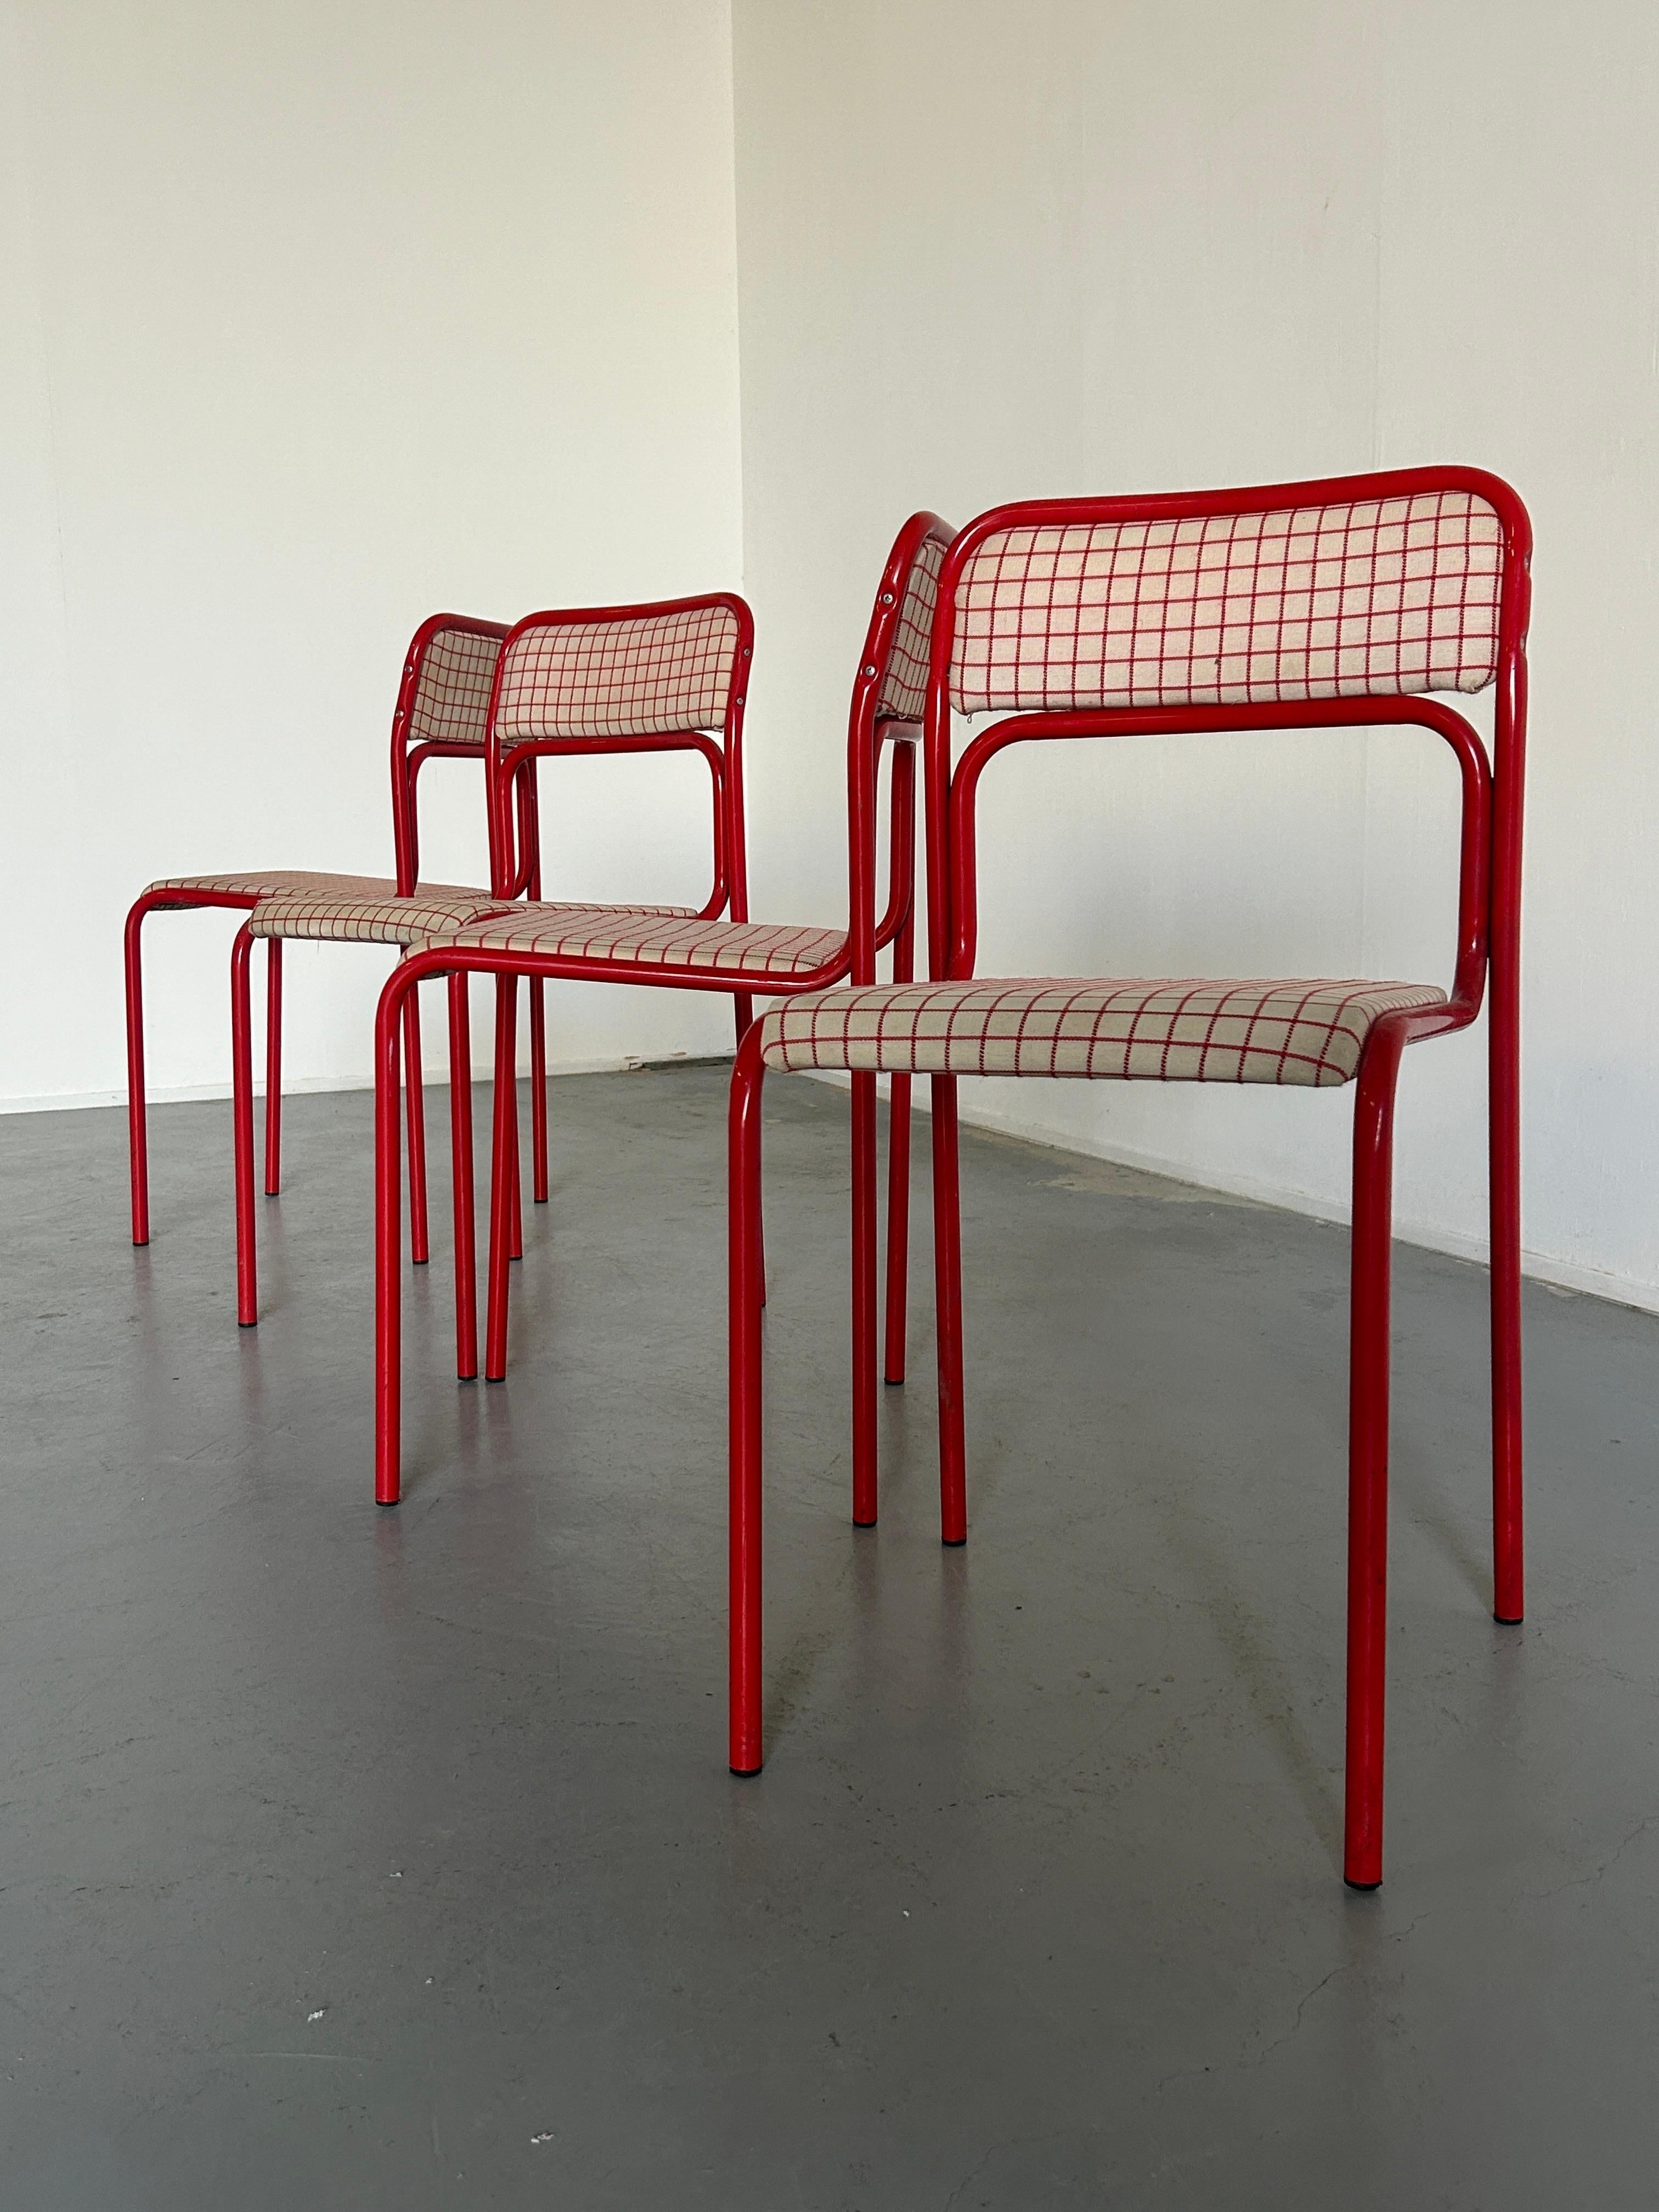 Set of 4 Pop-Art Syle Tubular Steel Checkered Red Upholstery Chairs, 80s Italy 1